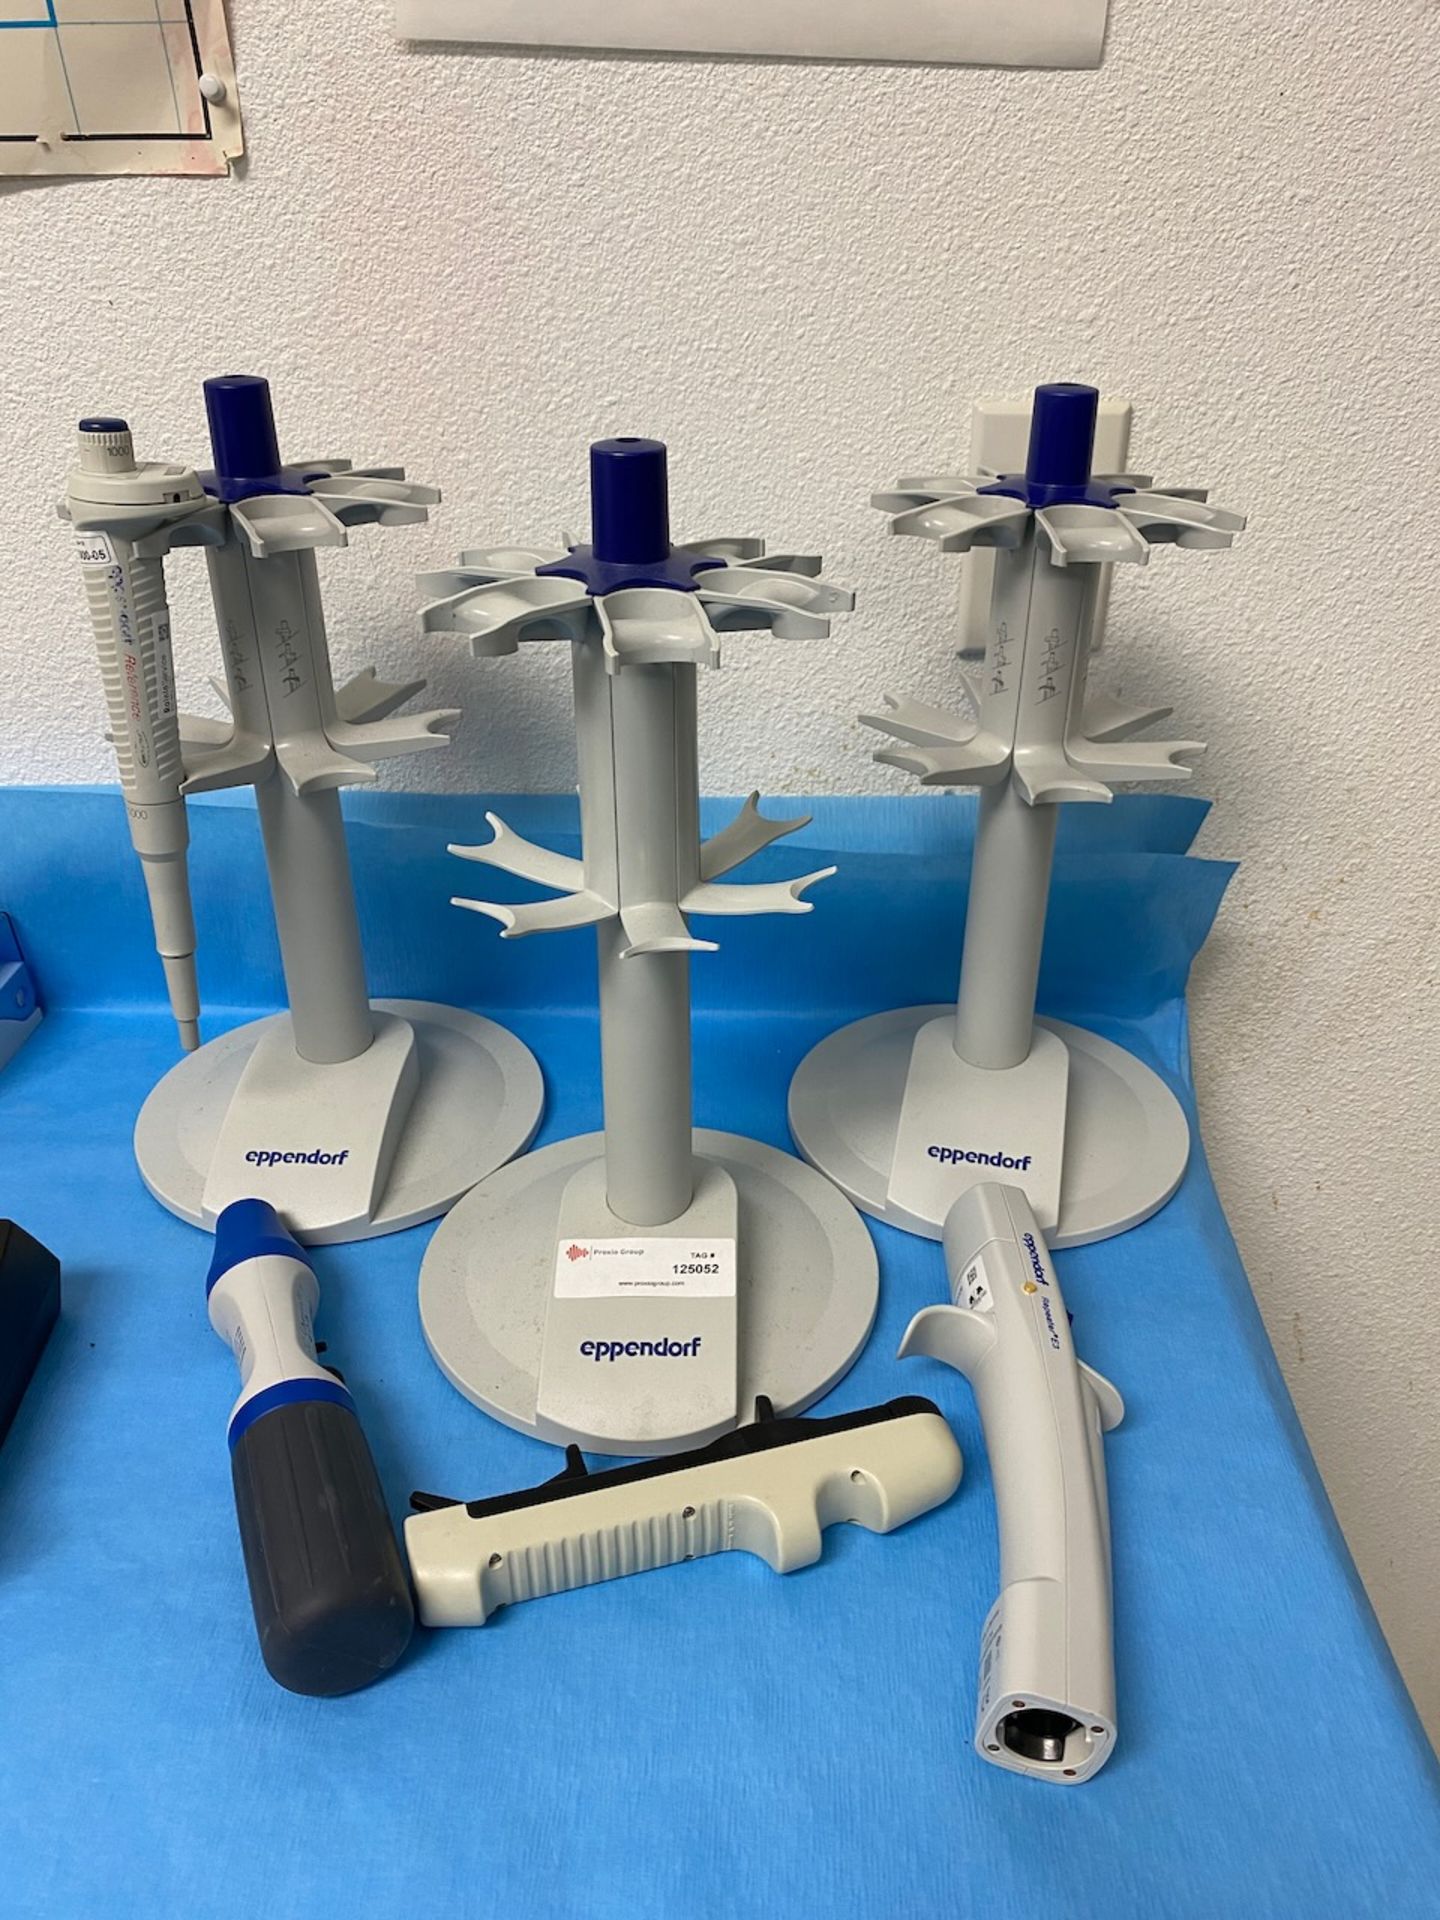 Eppendorf Pipette holders with pipettes